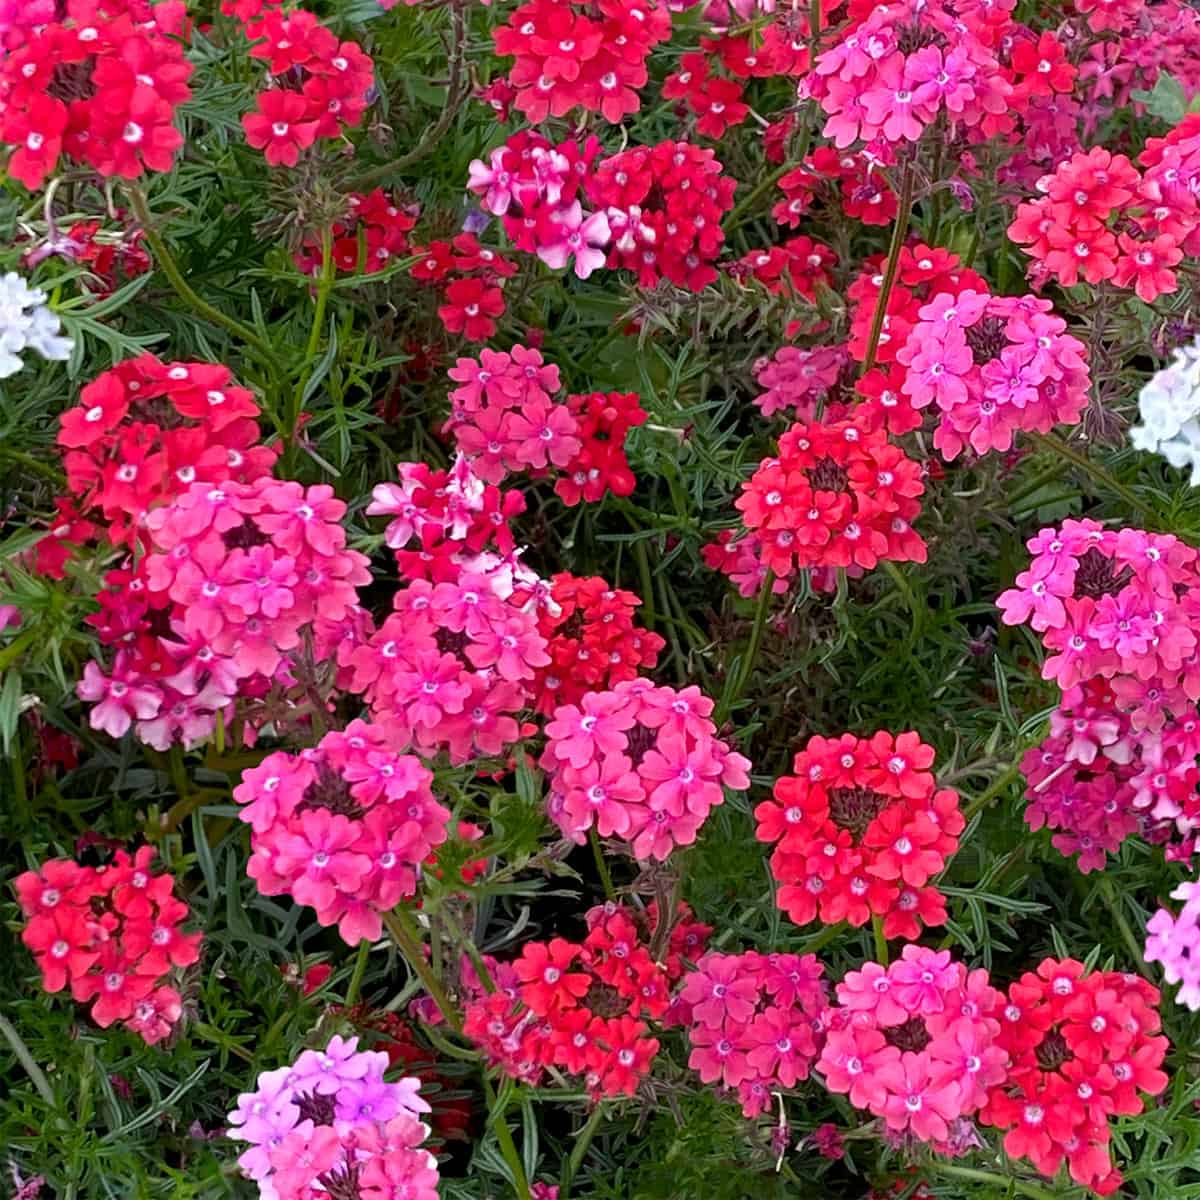 Sweetheart Kisses verbena does well in a container.